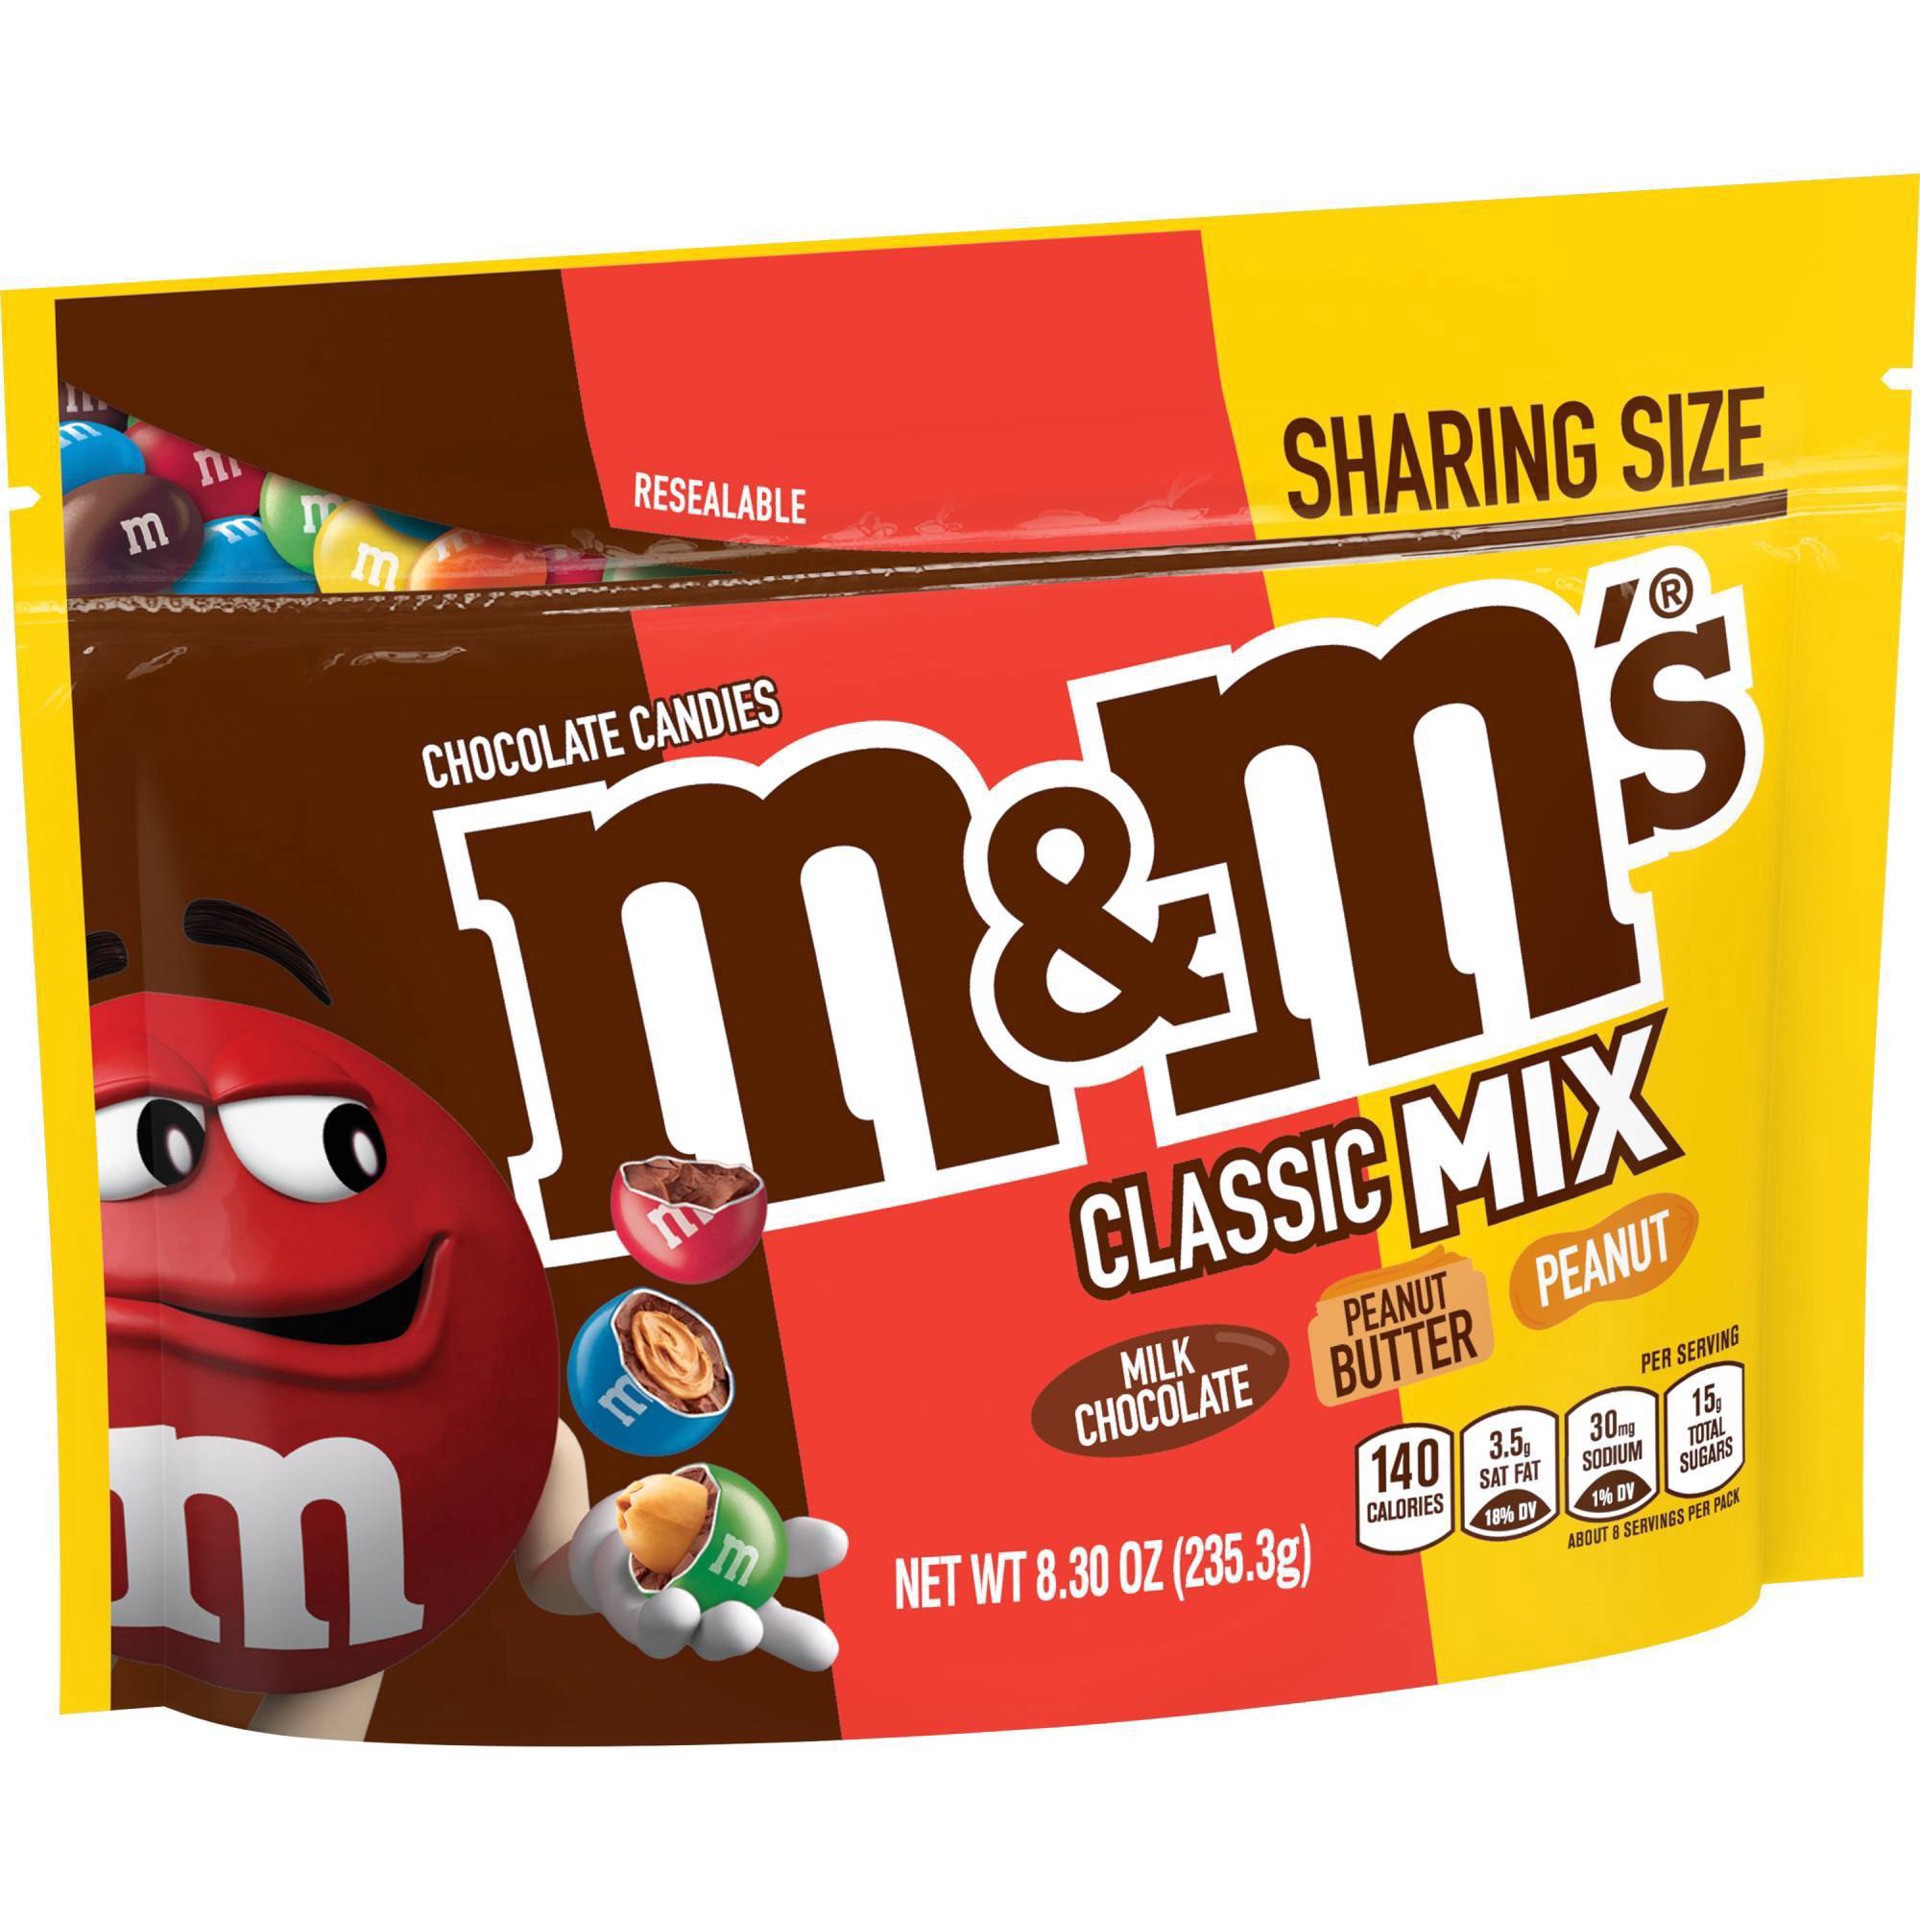 slide 3 of 15, M&M's Classic Mix Chocolate Candy, Sharing Size - 8.3oz, 8.3 oz